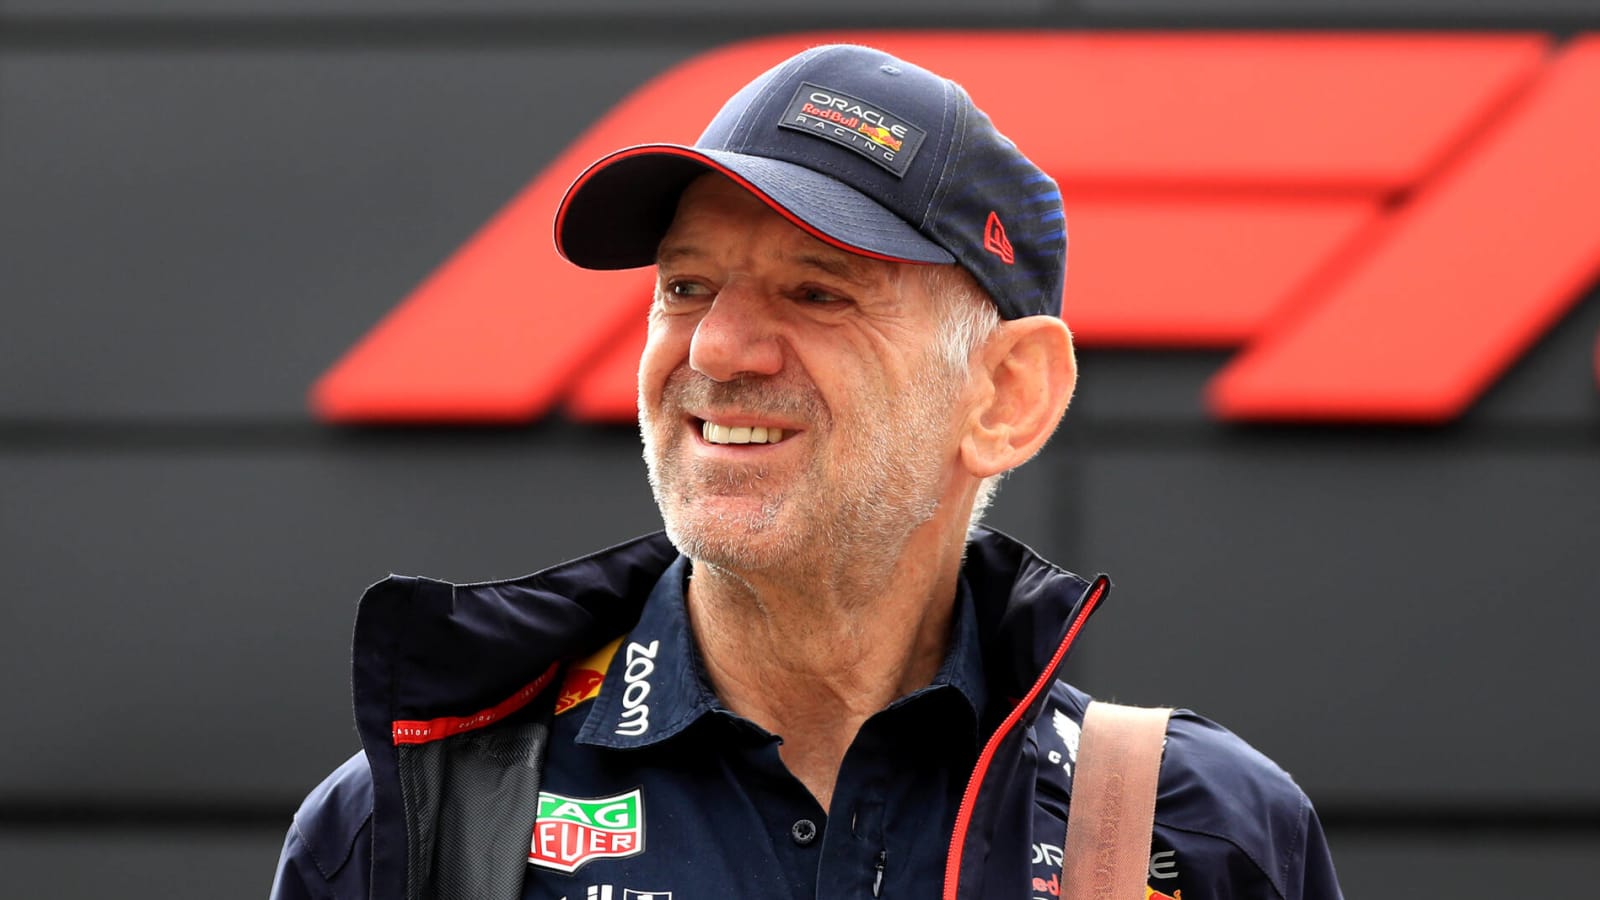 Adrian Newey rumored to sign Ferrari deal with over $19 million salary